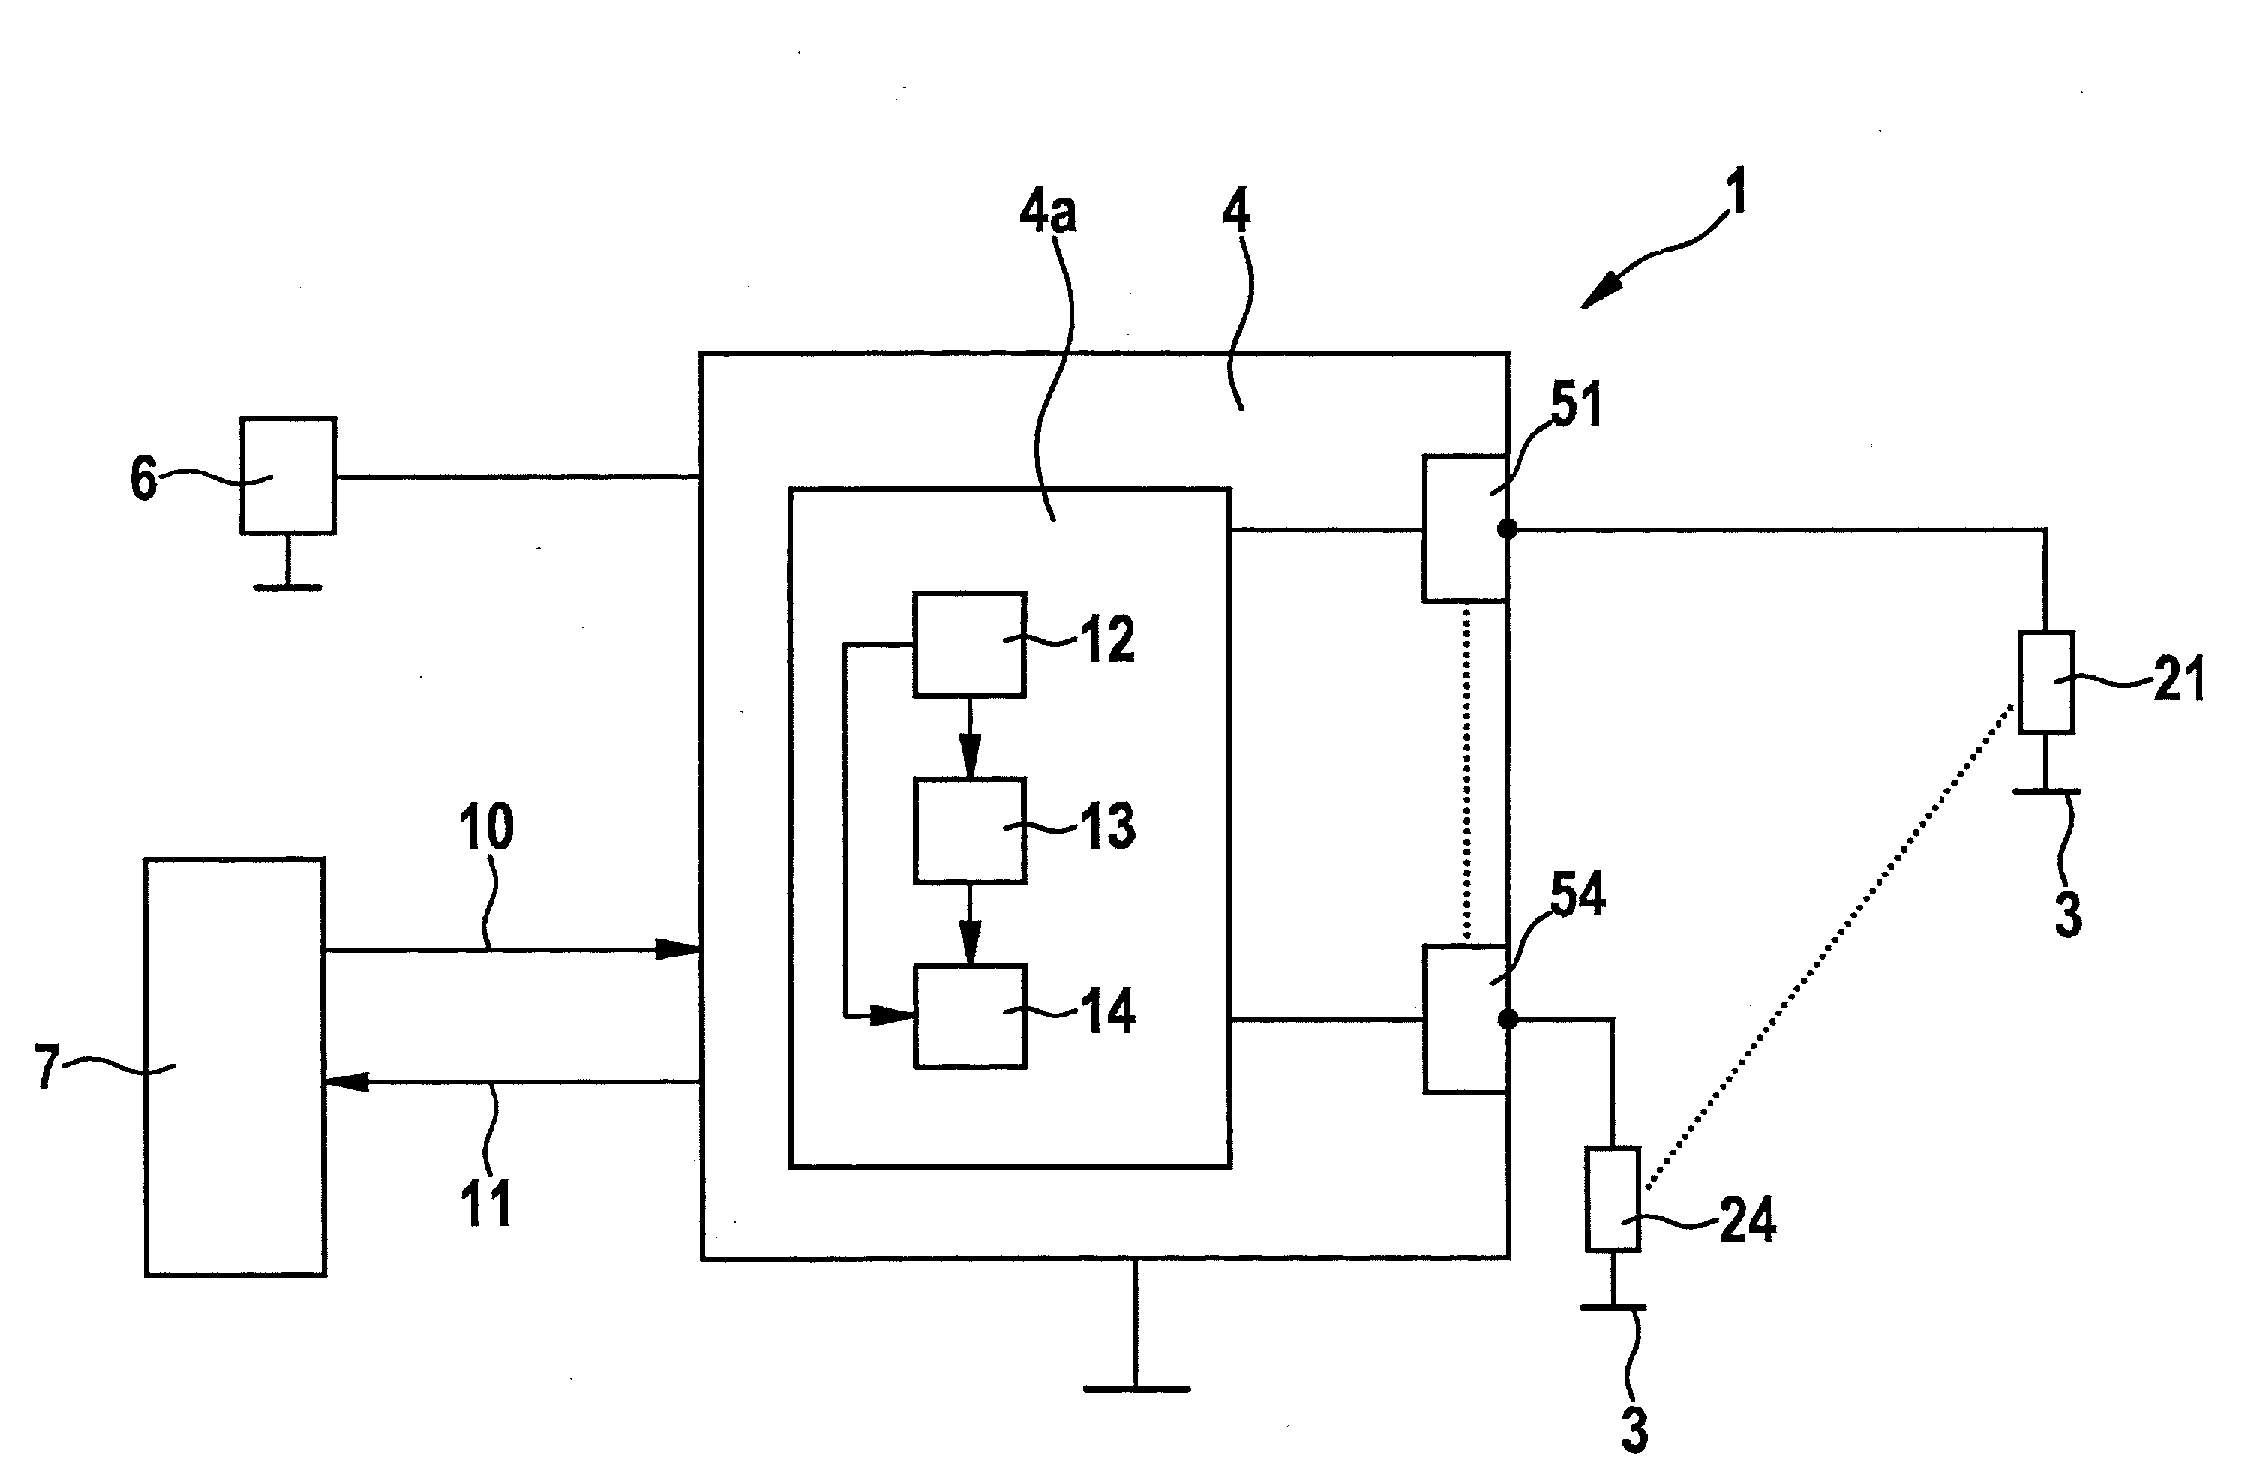 Method and device for detecting a replacement of pencil glow plugs in an internal combustion engine